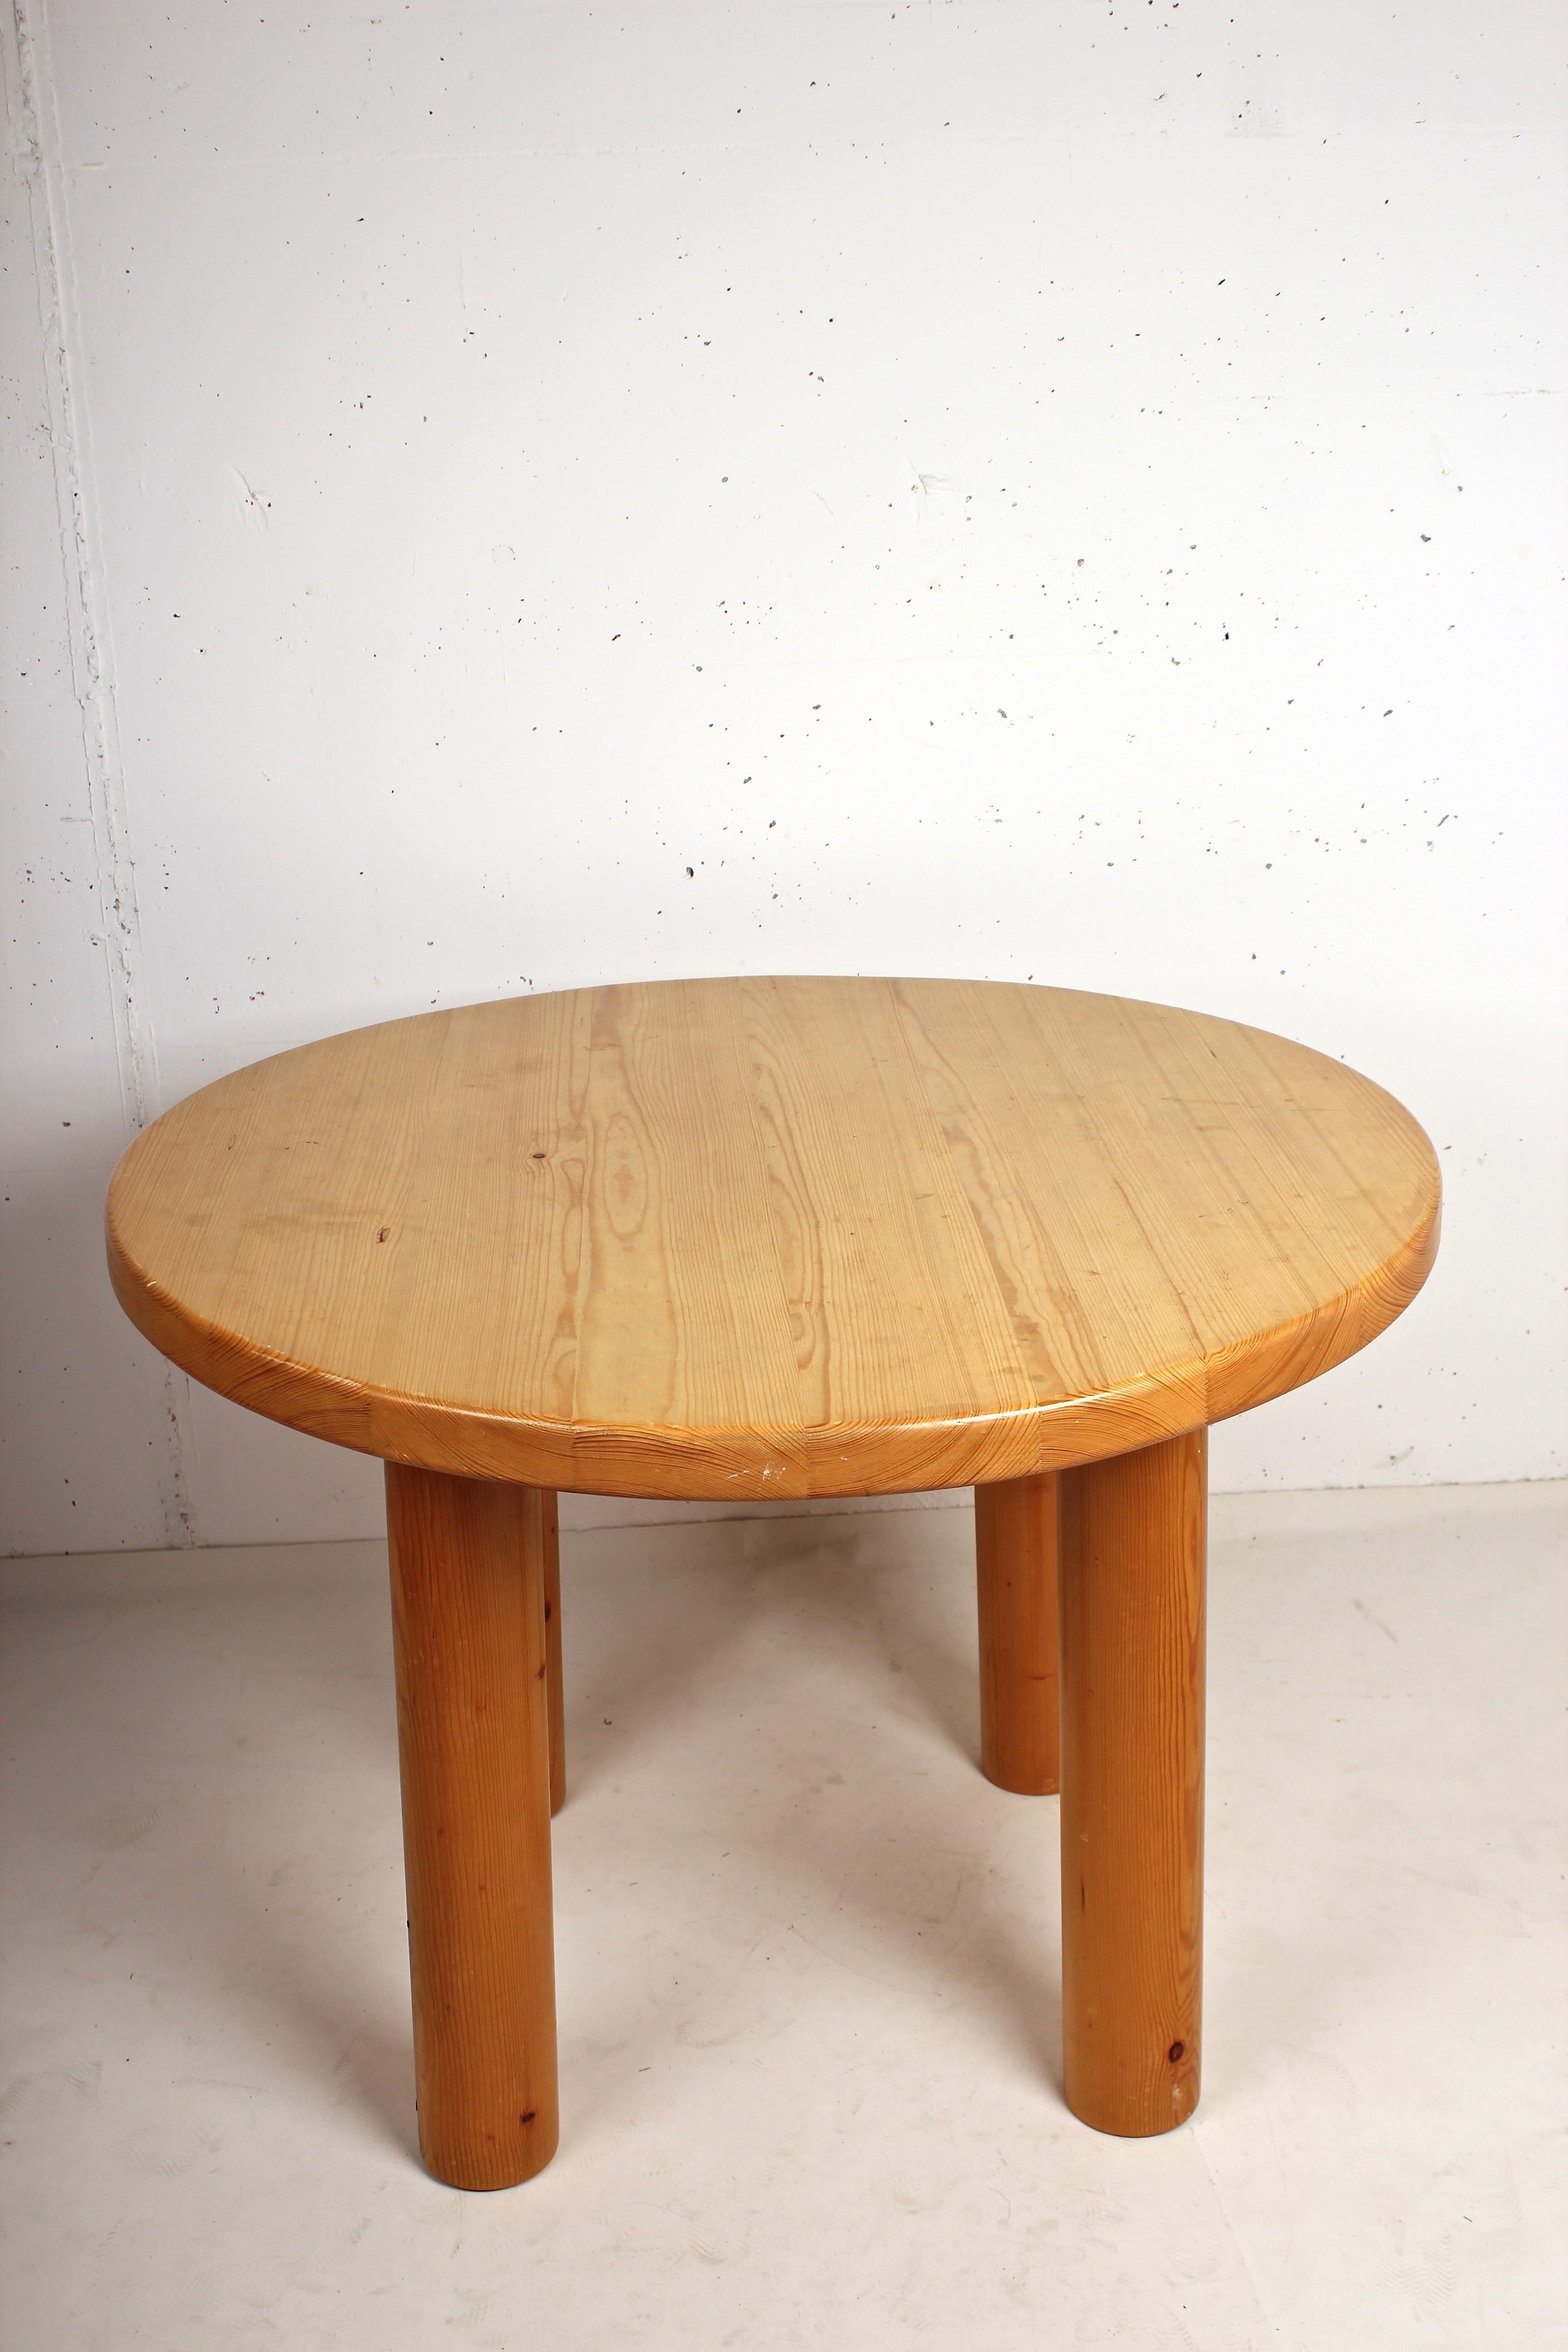 Mid-Century Modern Charlotte Perriand Doron Type Table for Résidence Les Allues in Méribel, 1971